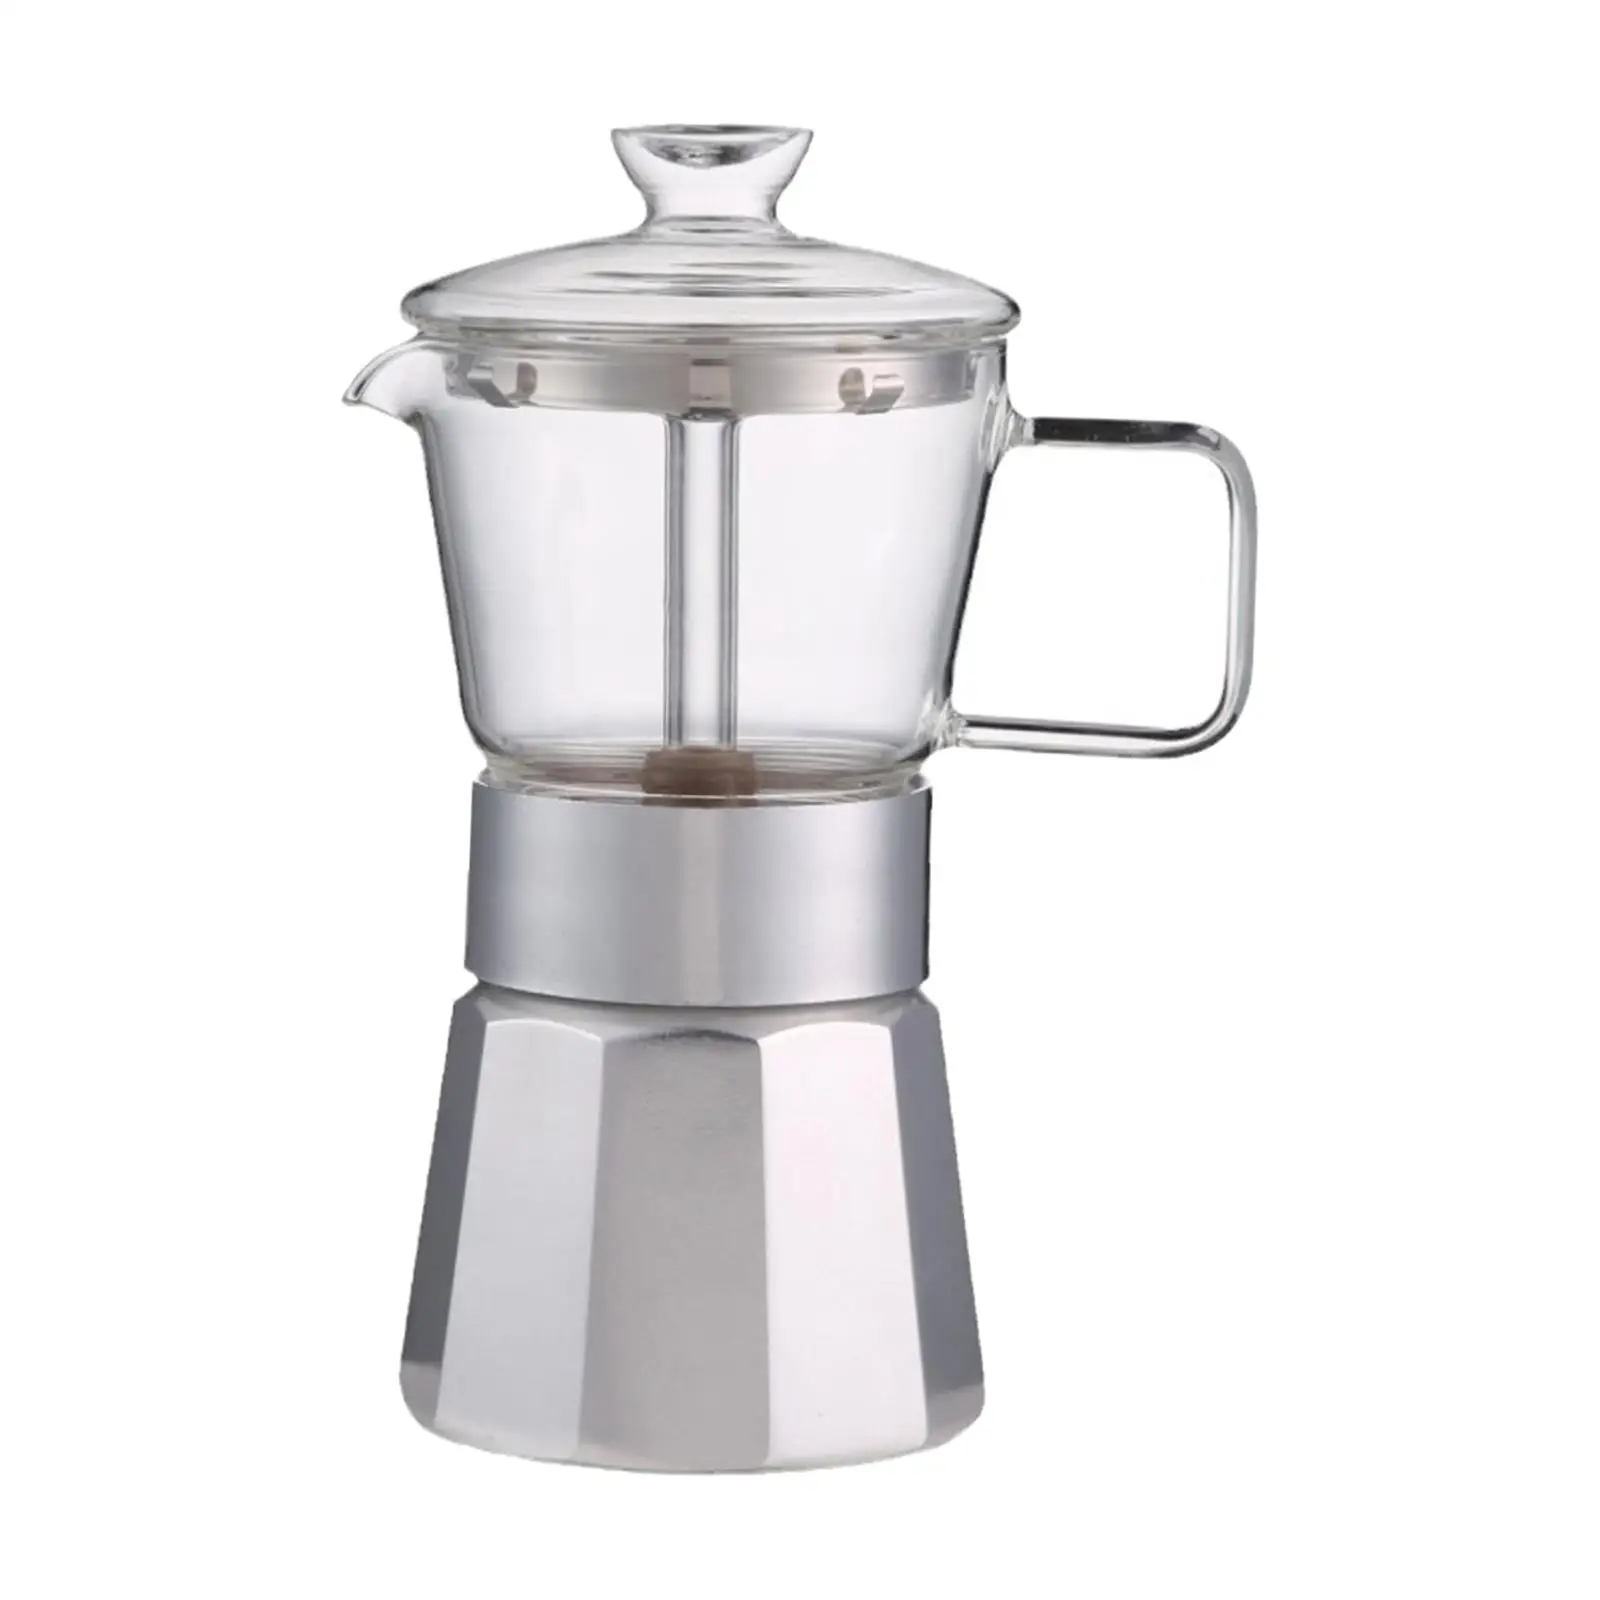 Traditional Italian Coffee Maker Portable Lightweight Makes Delicious Coffee for Camping Outdoor Activities Barista Holiday Gift